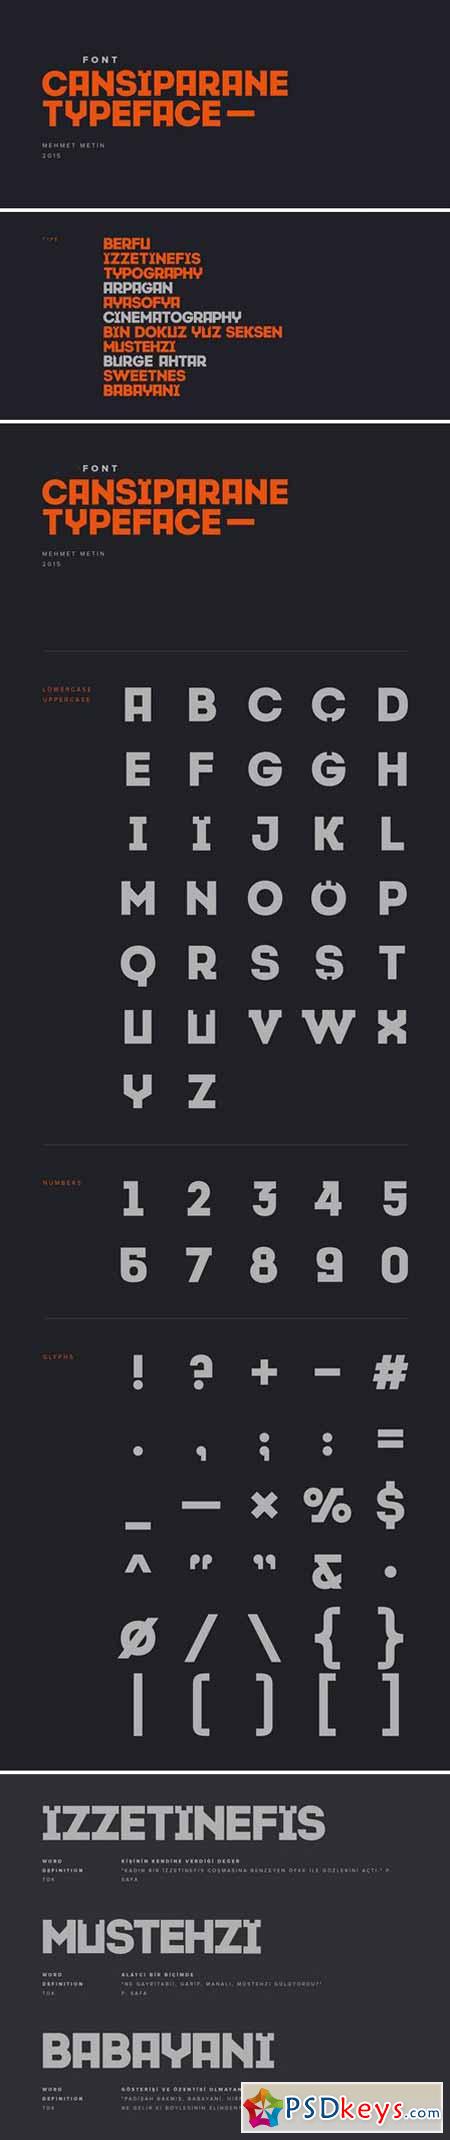 Cansiparane Typeface